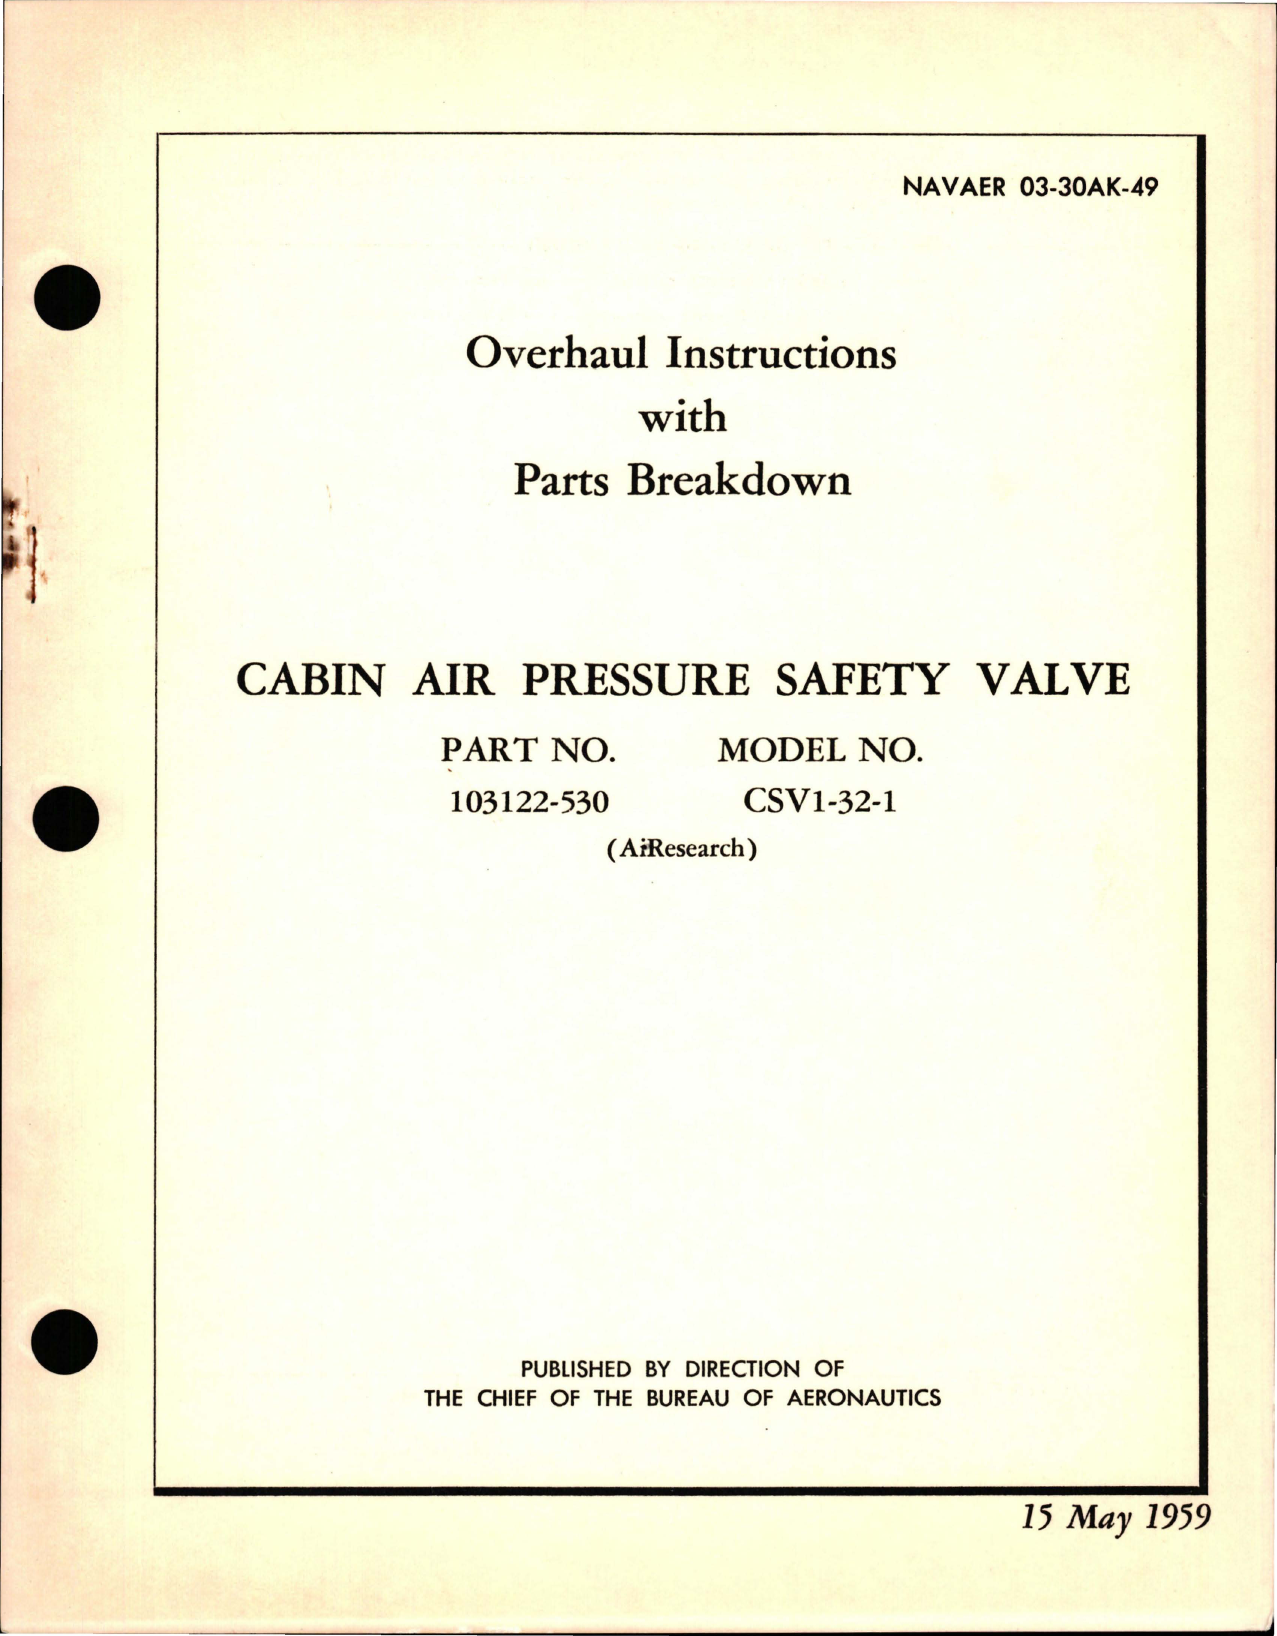 Sample page 1 from AirCorps Library document: Overhaul Instructions with Parts Breakdown for Cabin Air Pressure Safety Valve - Parts 103122-530 - Model CSV1-32-1